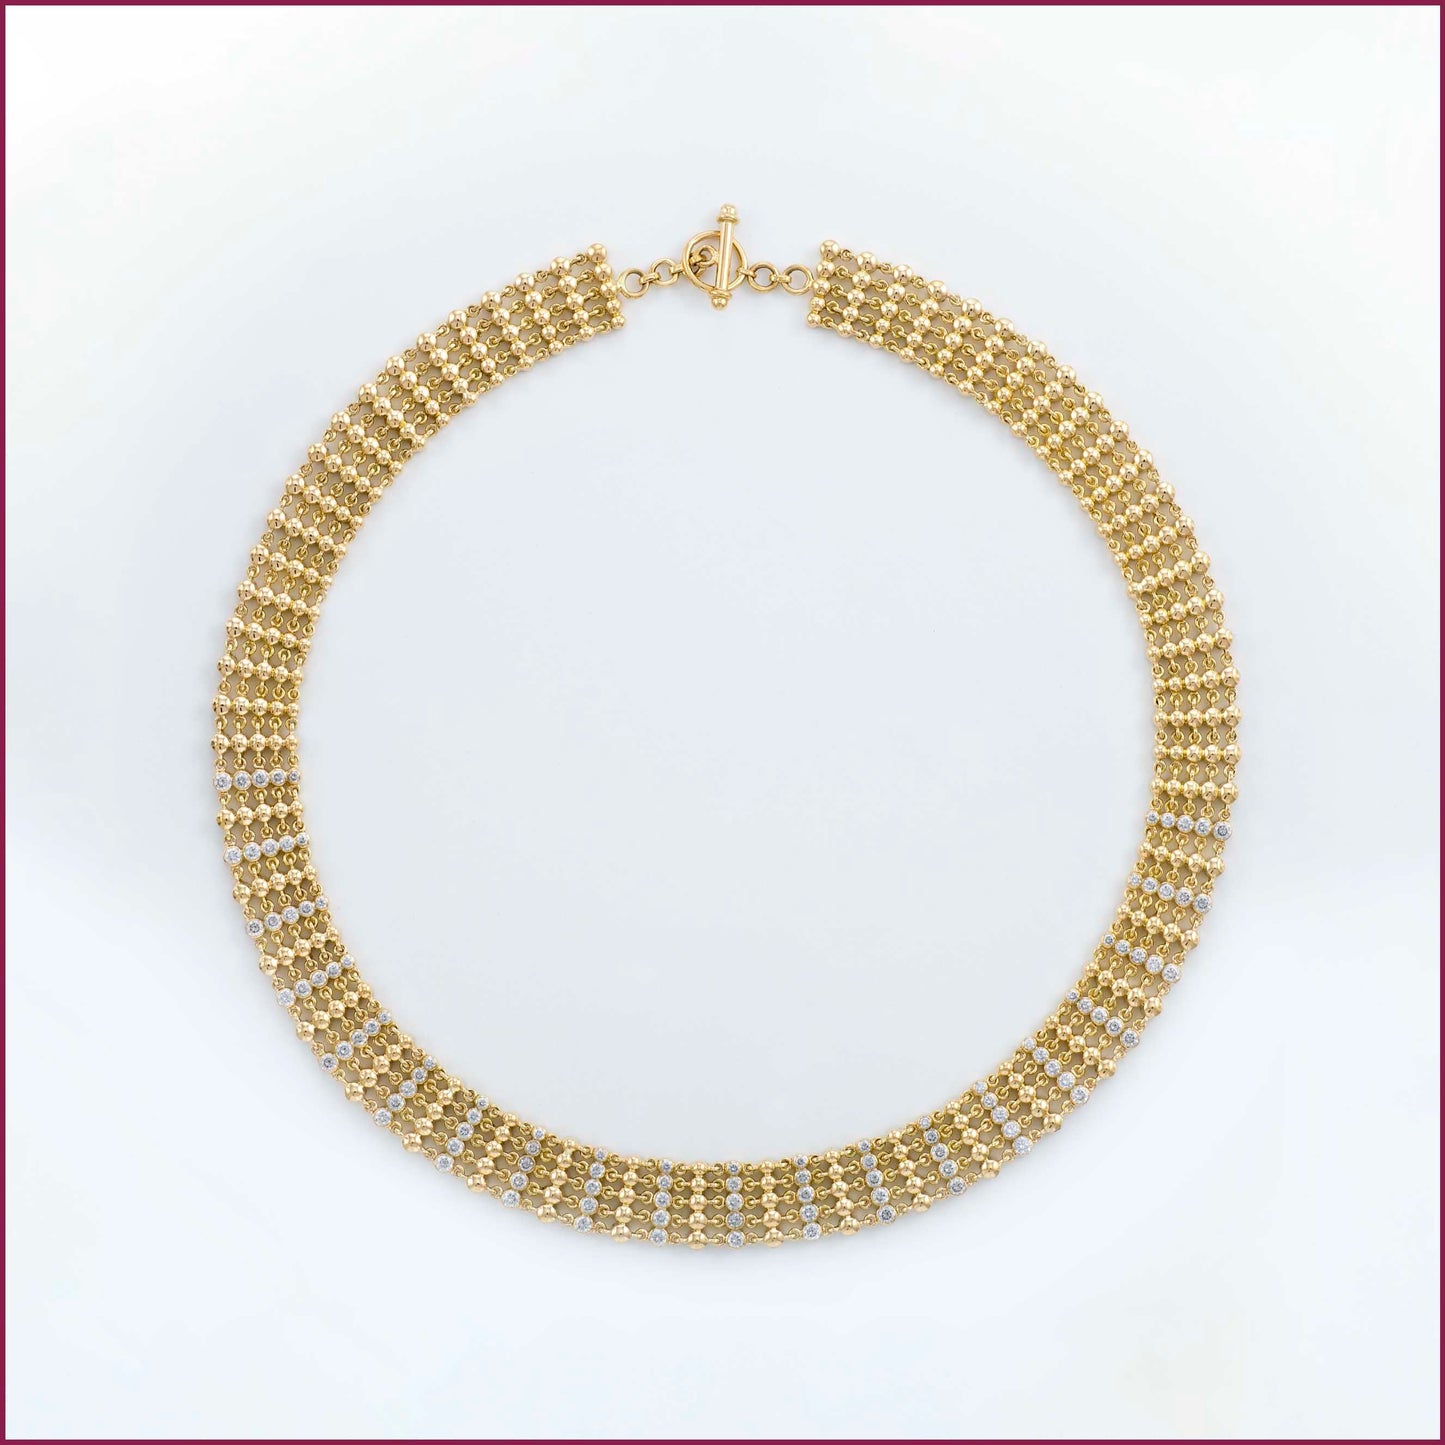 The Pavithra Gold and Diamond Necklace by Rasvihar